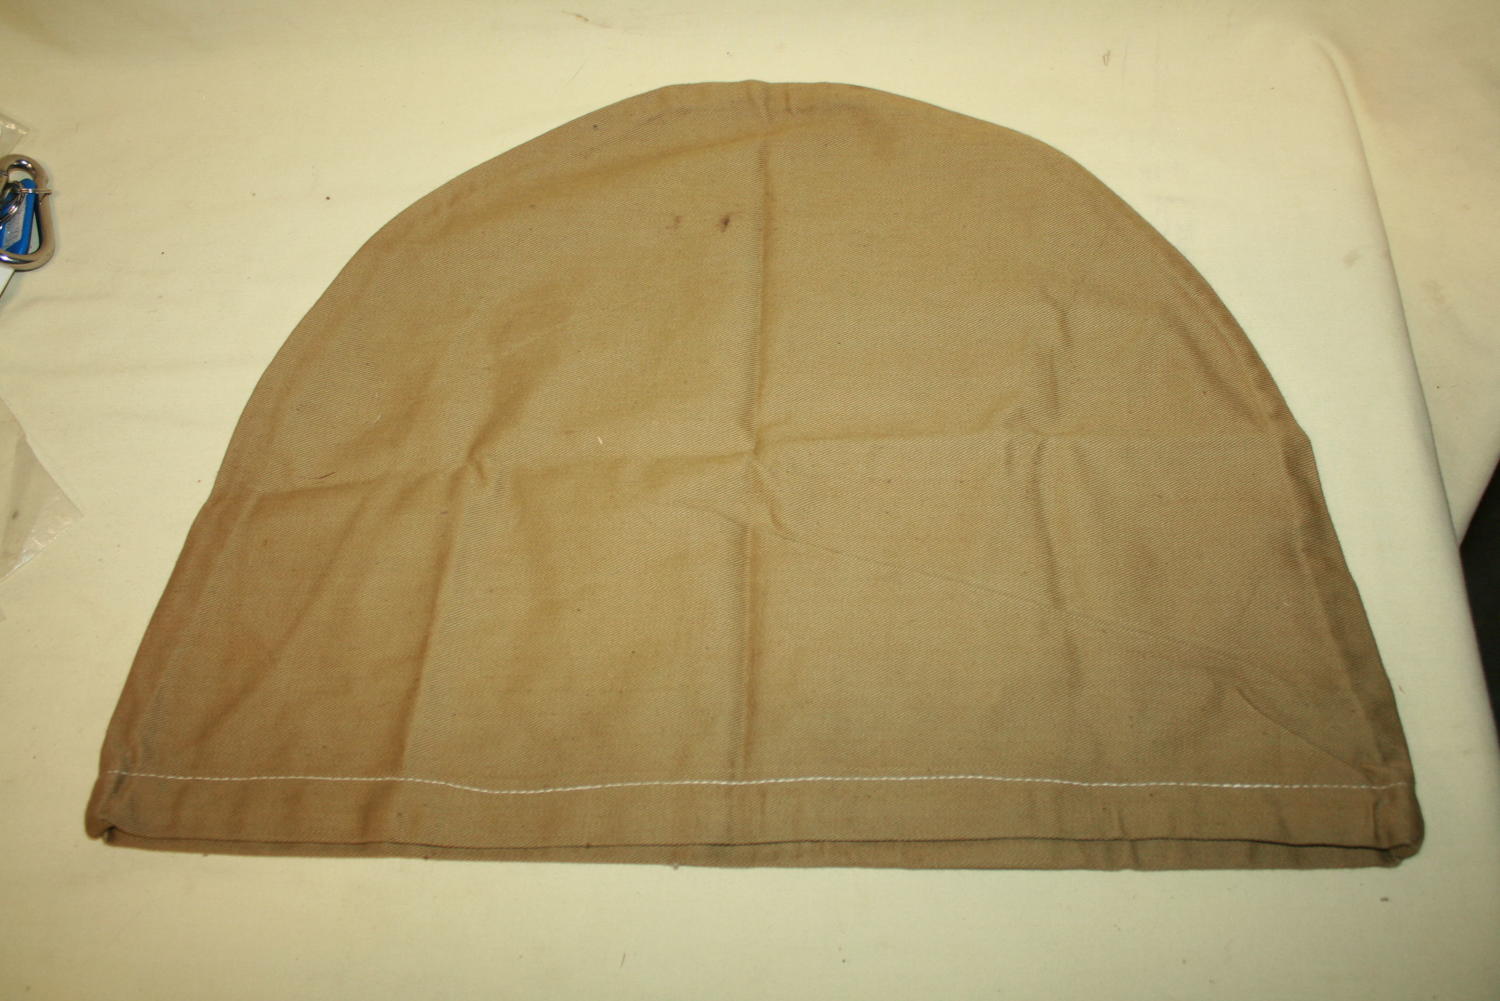 A WWII SOLAR HELMET COVER